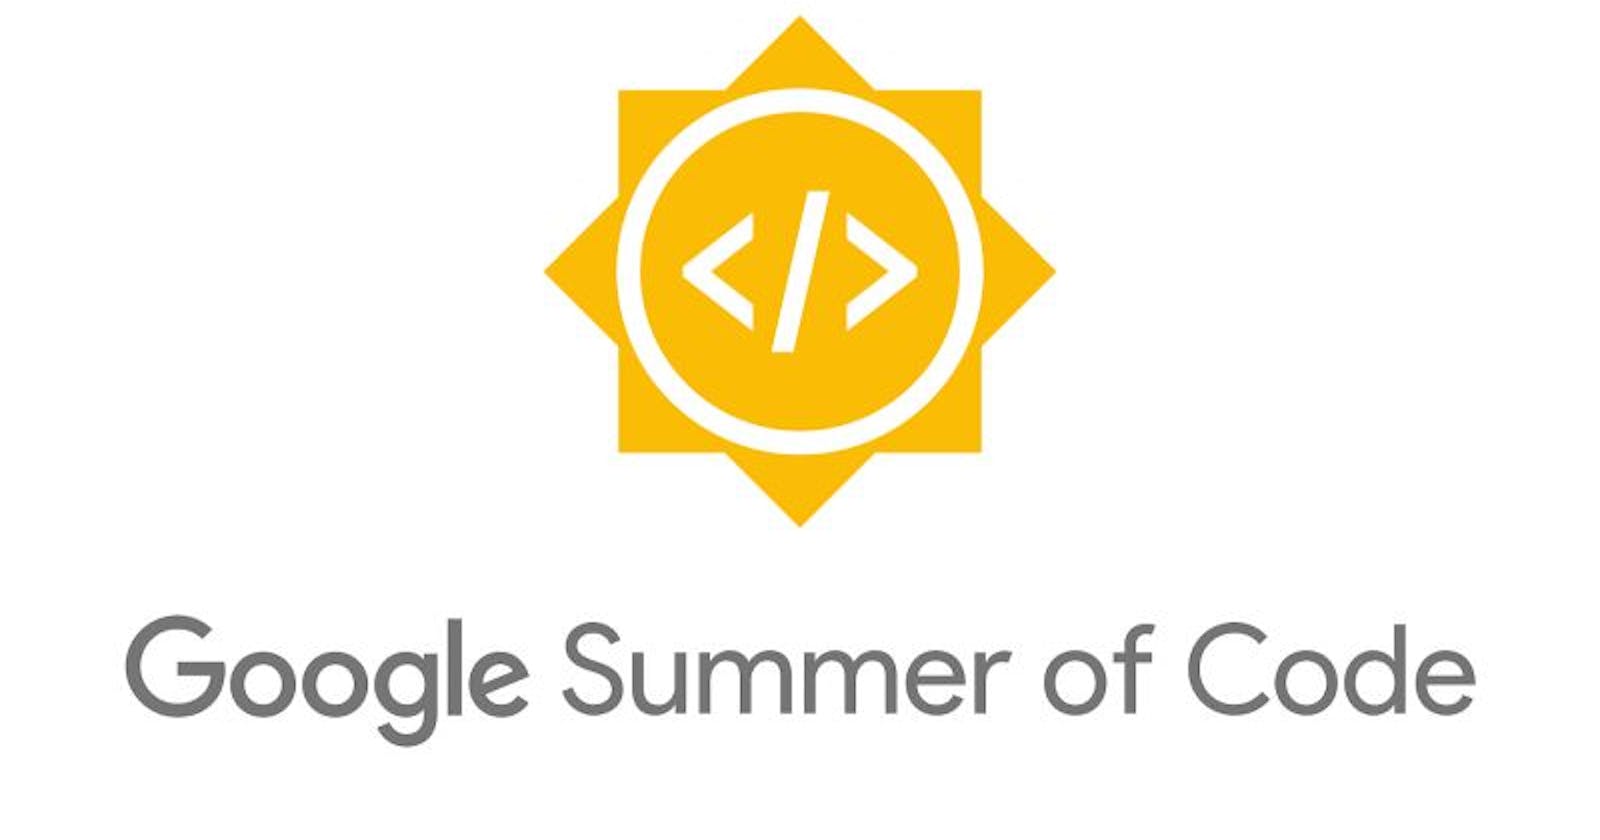 Frequently Asked Questions on Google Summer of Code